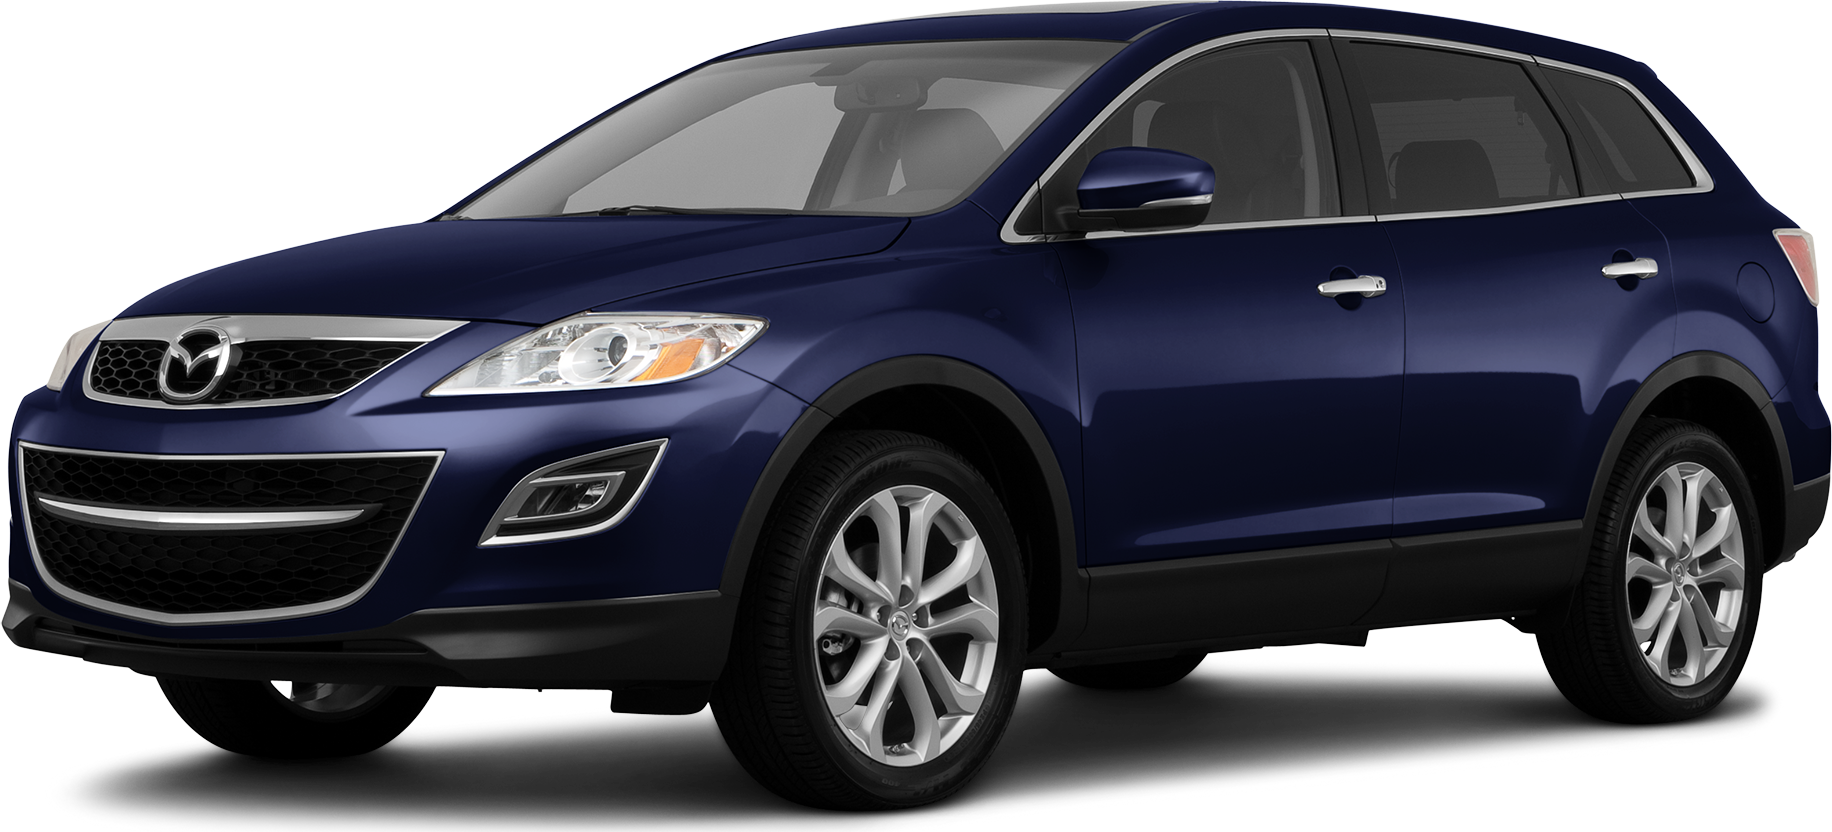 2011 Mazda Cx 9 Price Kbb Value And Cars For Sale Kelley Blue Book